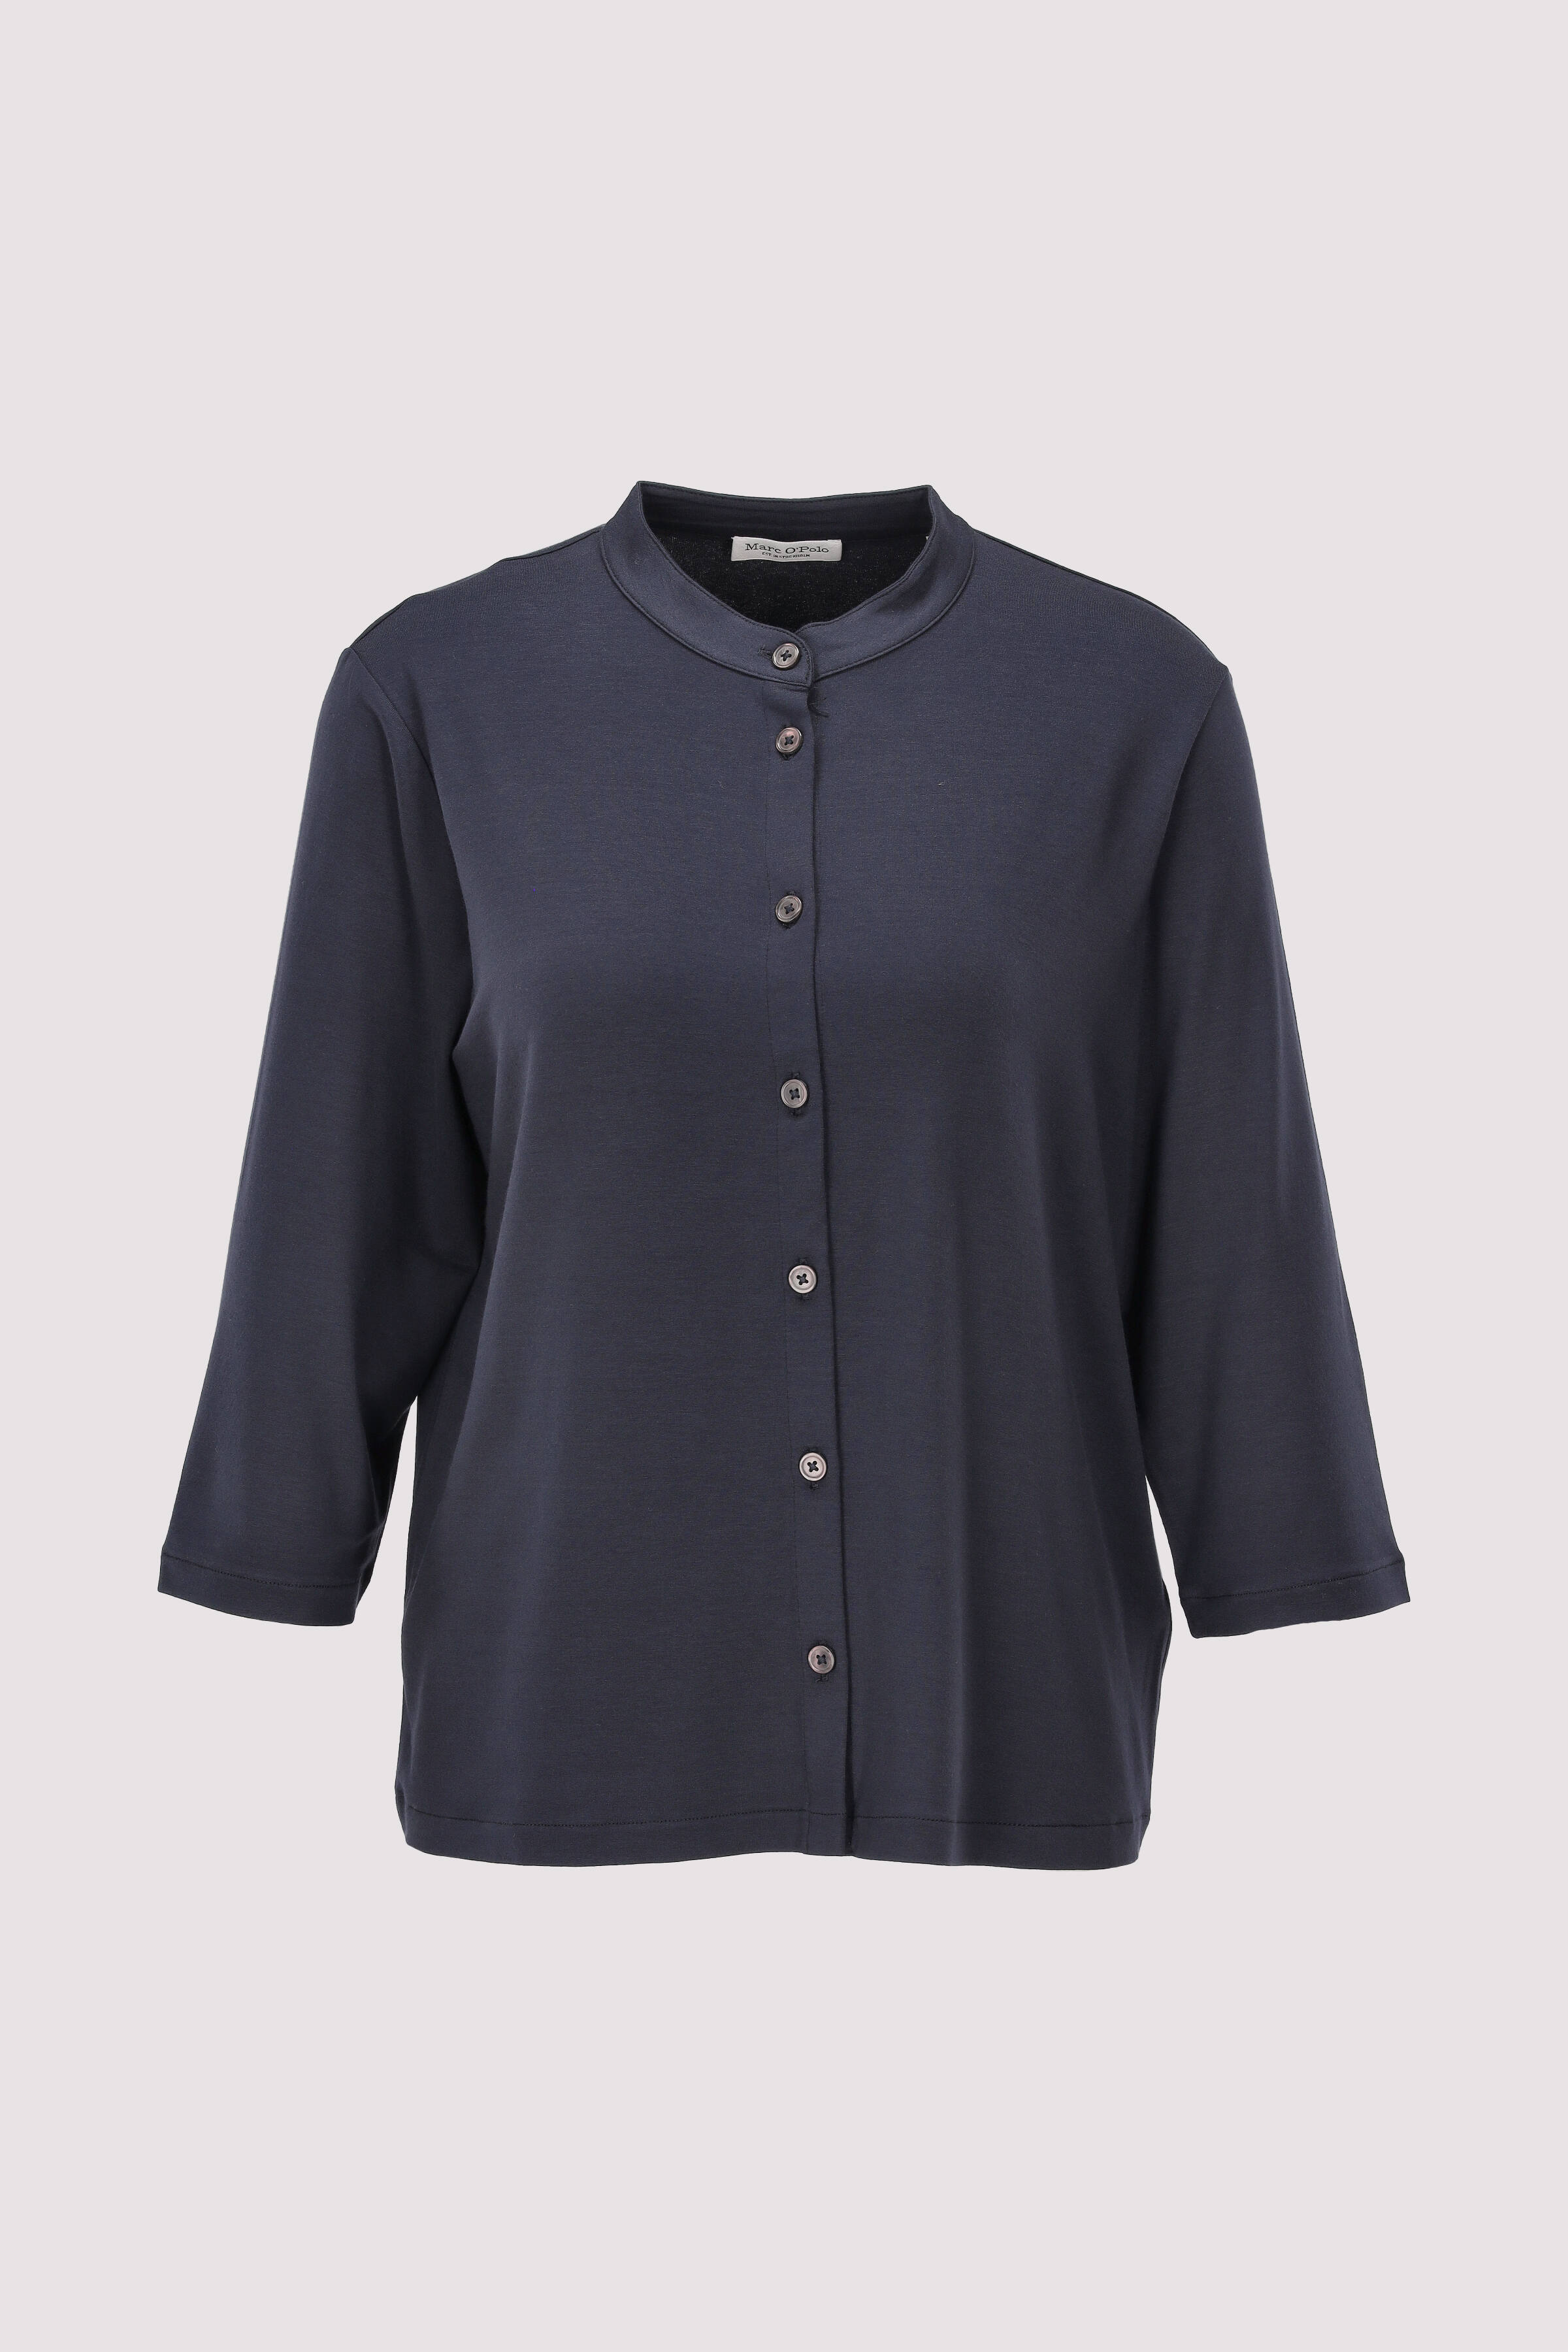 Jersey blouse, stand up collar